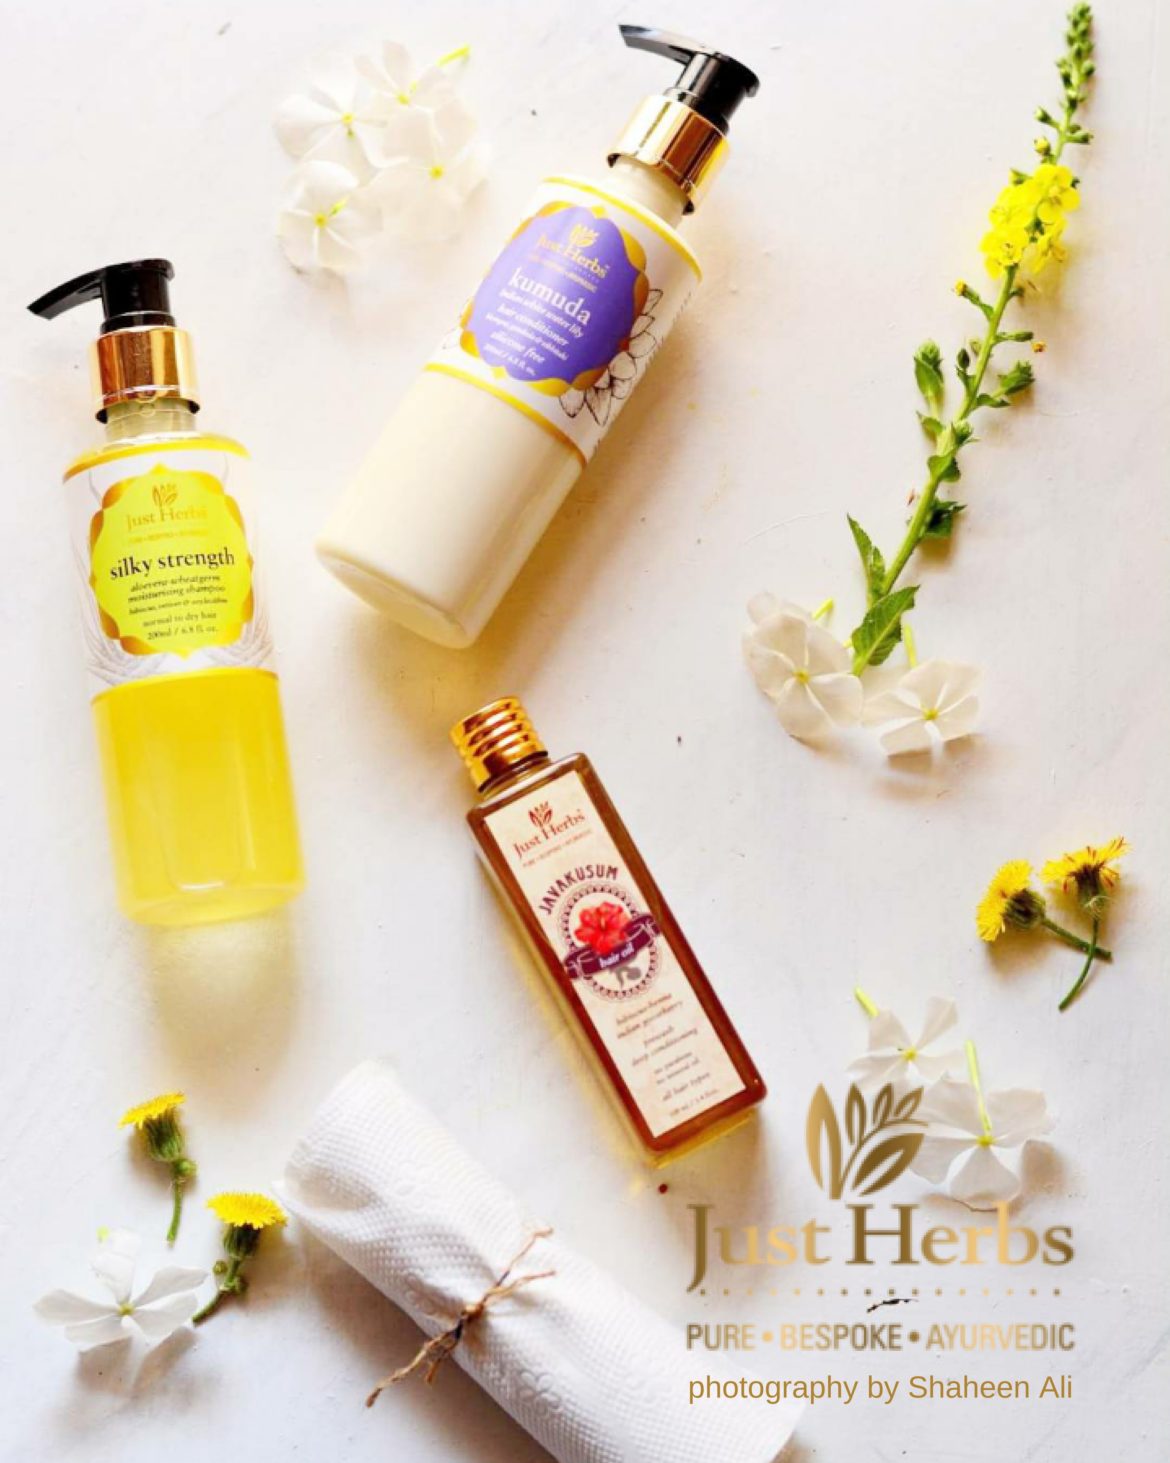 My Take On 'Just Herbs' : Luxurious & safe natural-skincare